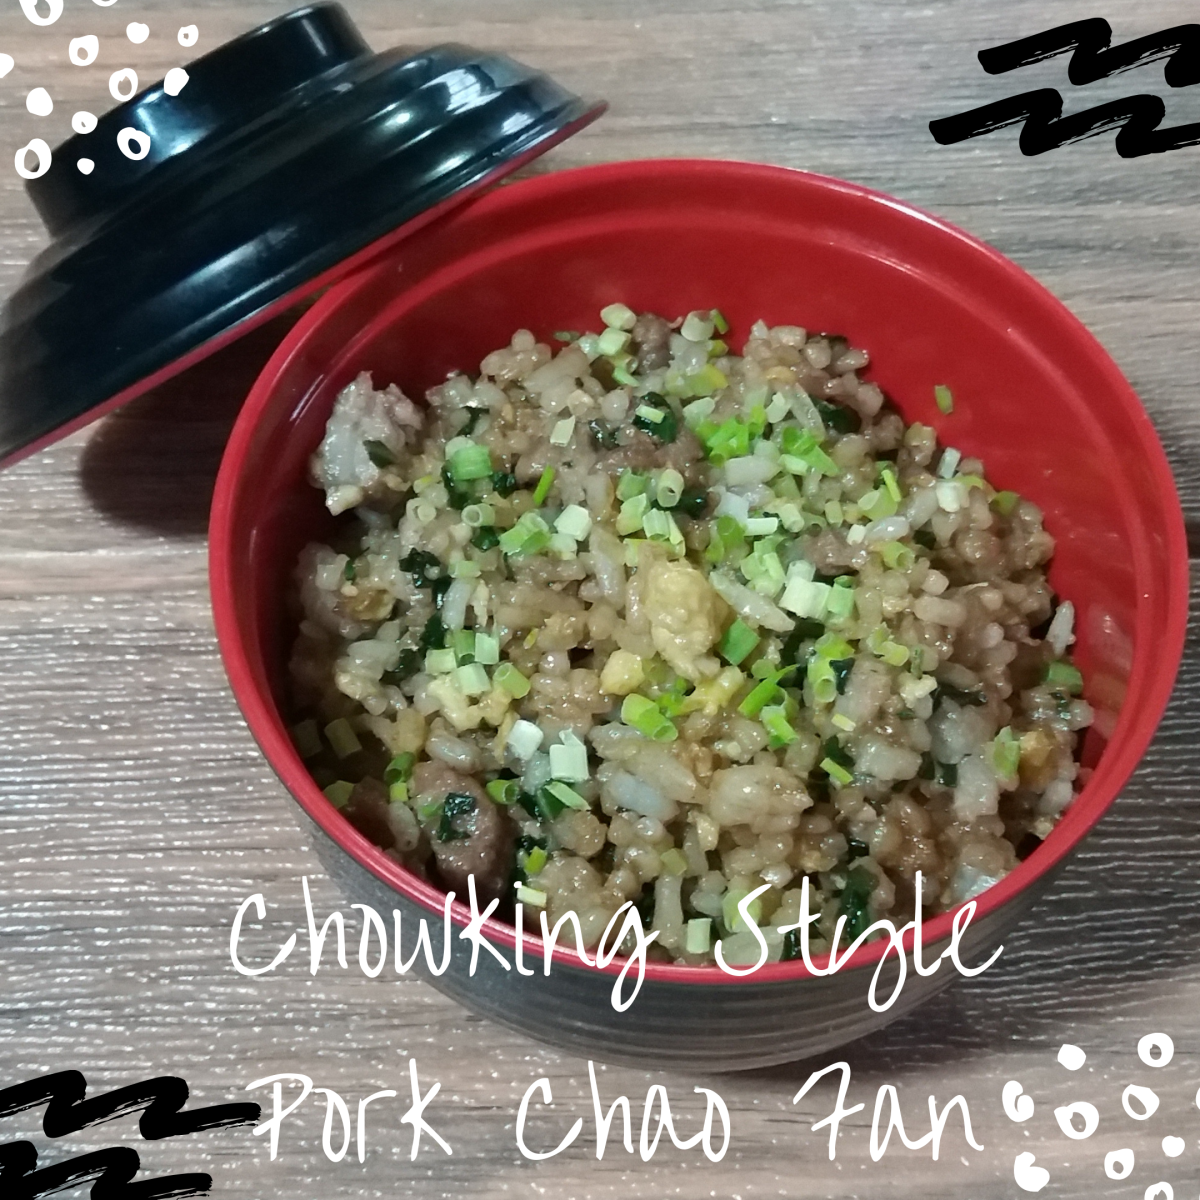 Learn how to make Chowking-style pork chao fan just like the restaurant does.